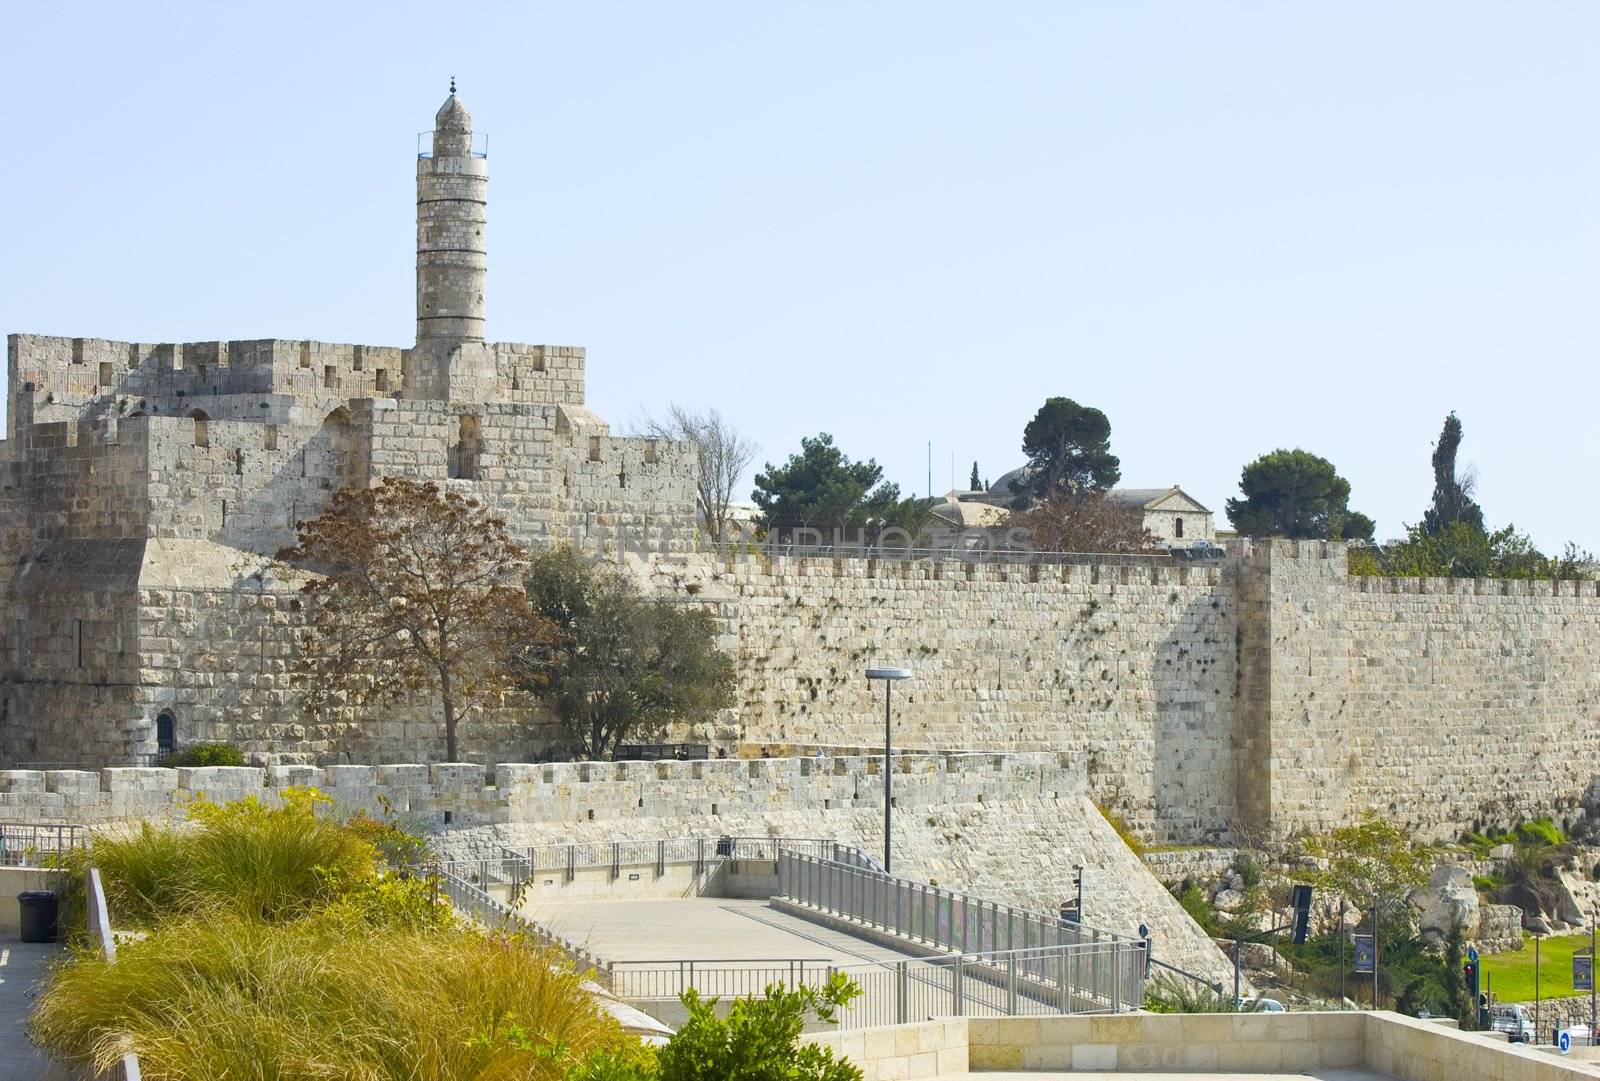 The Ancient Walls Surrounding Old City in 
Jerusalem.